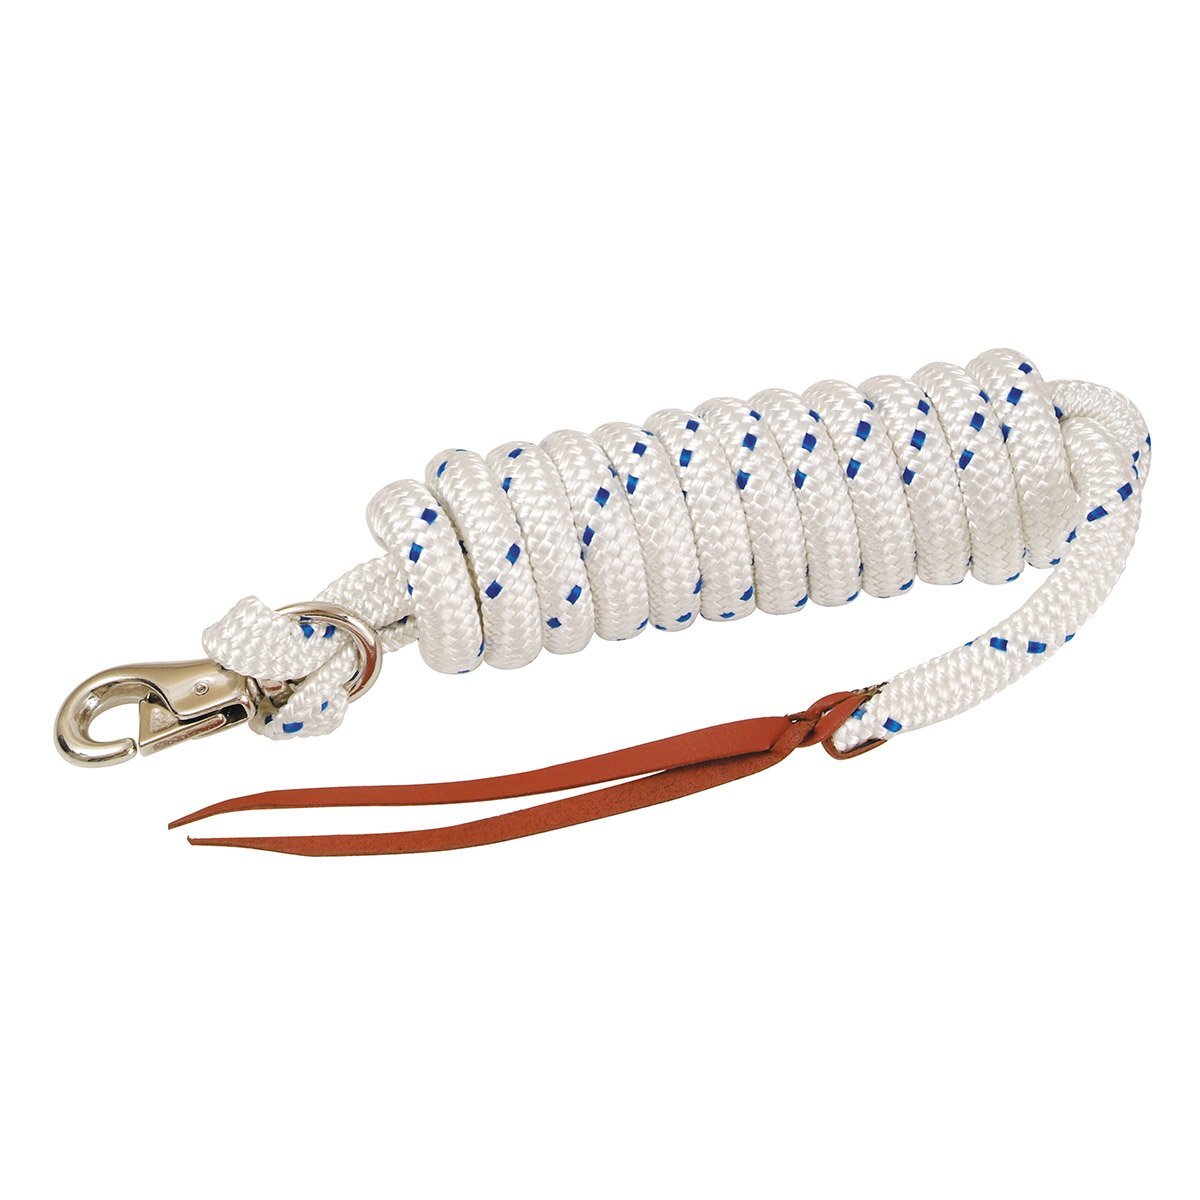 Eurohunter Training Rope (with bull snap)